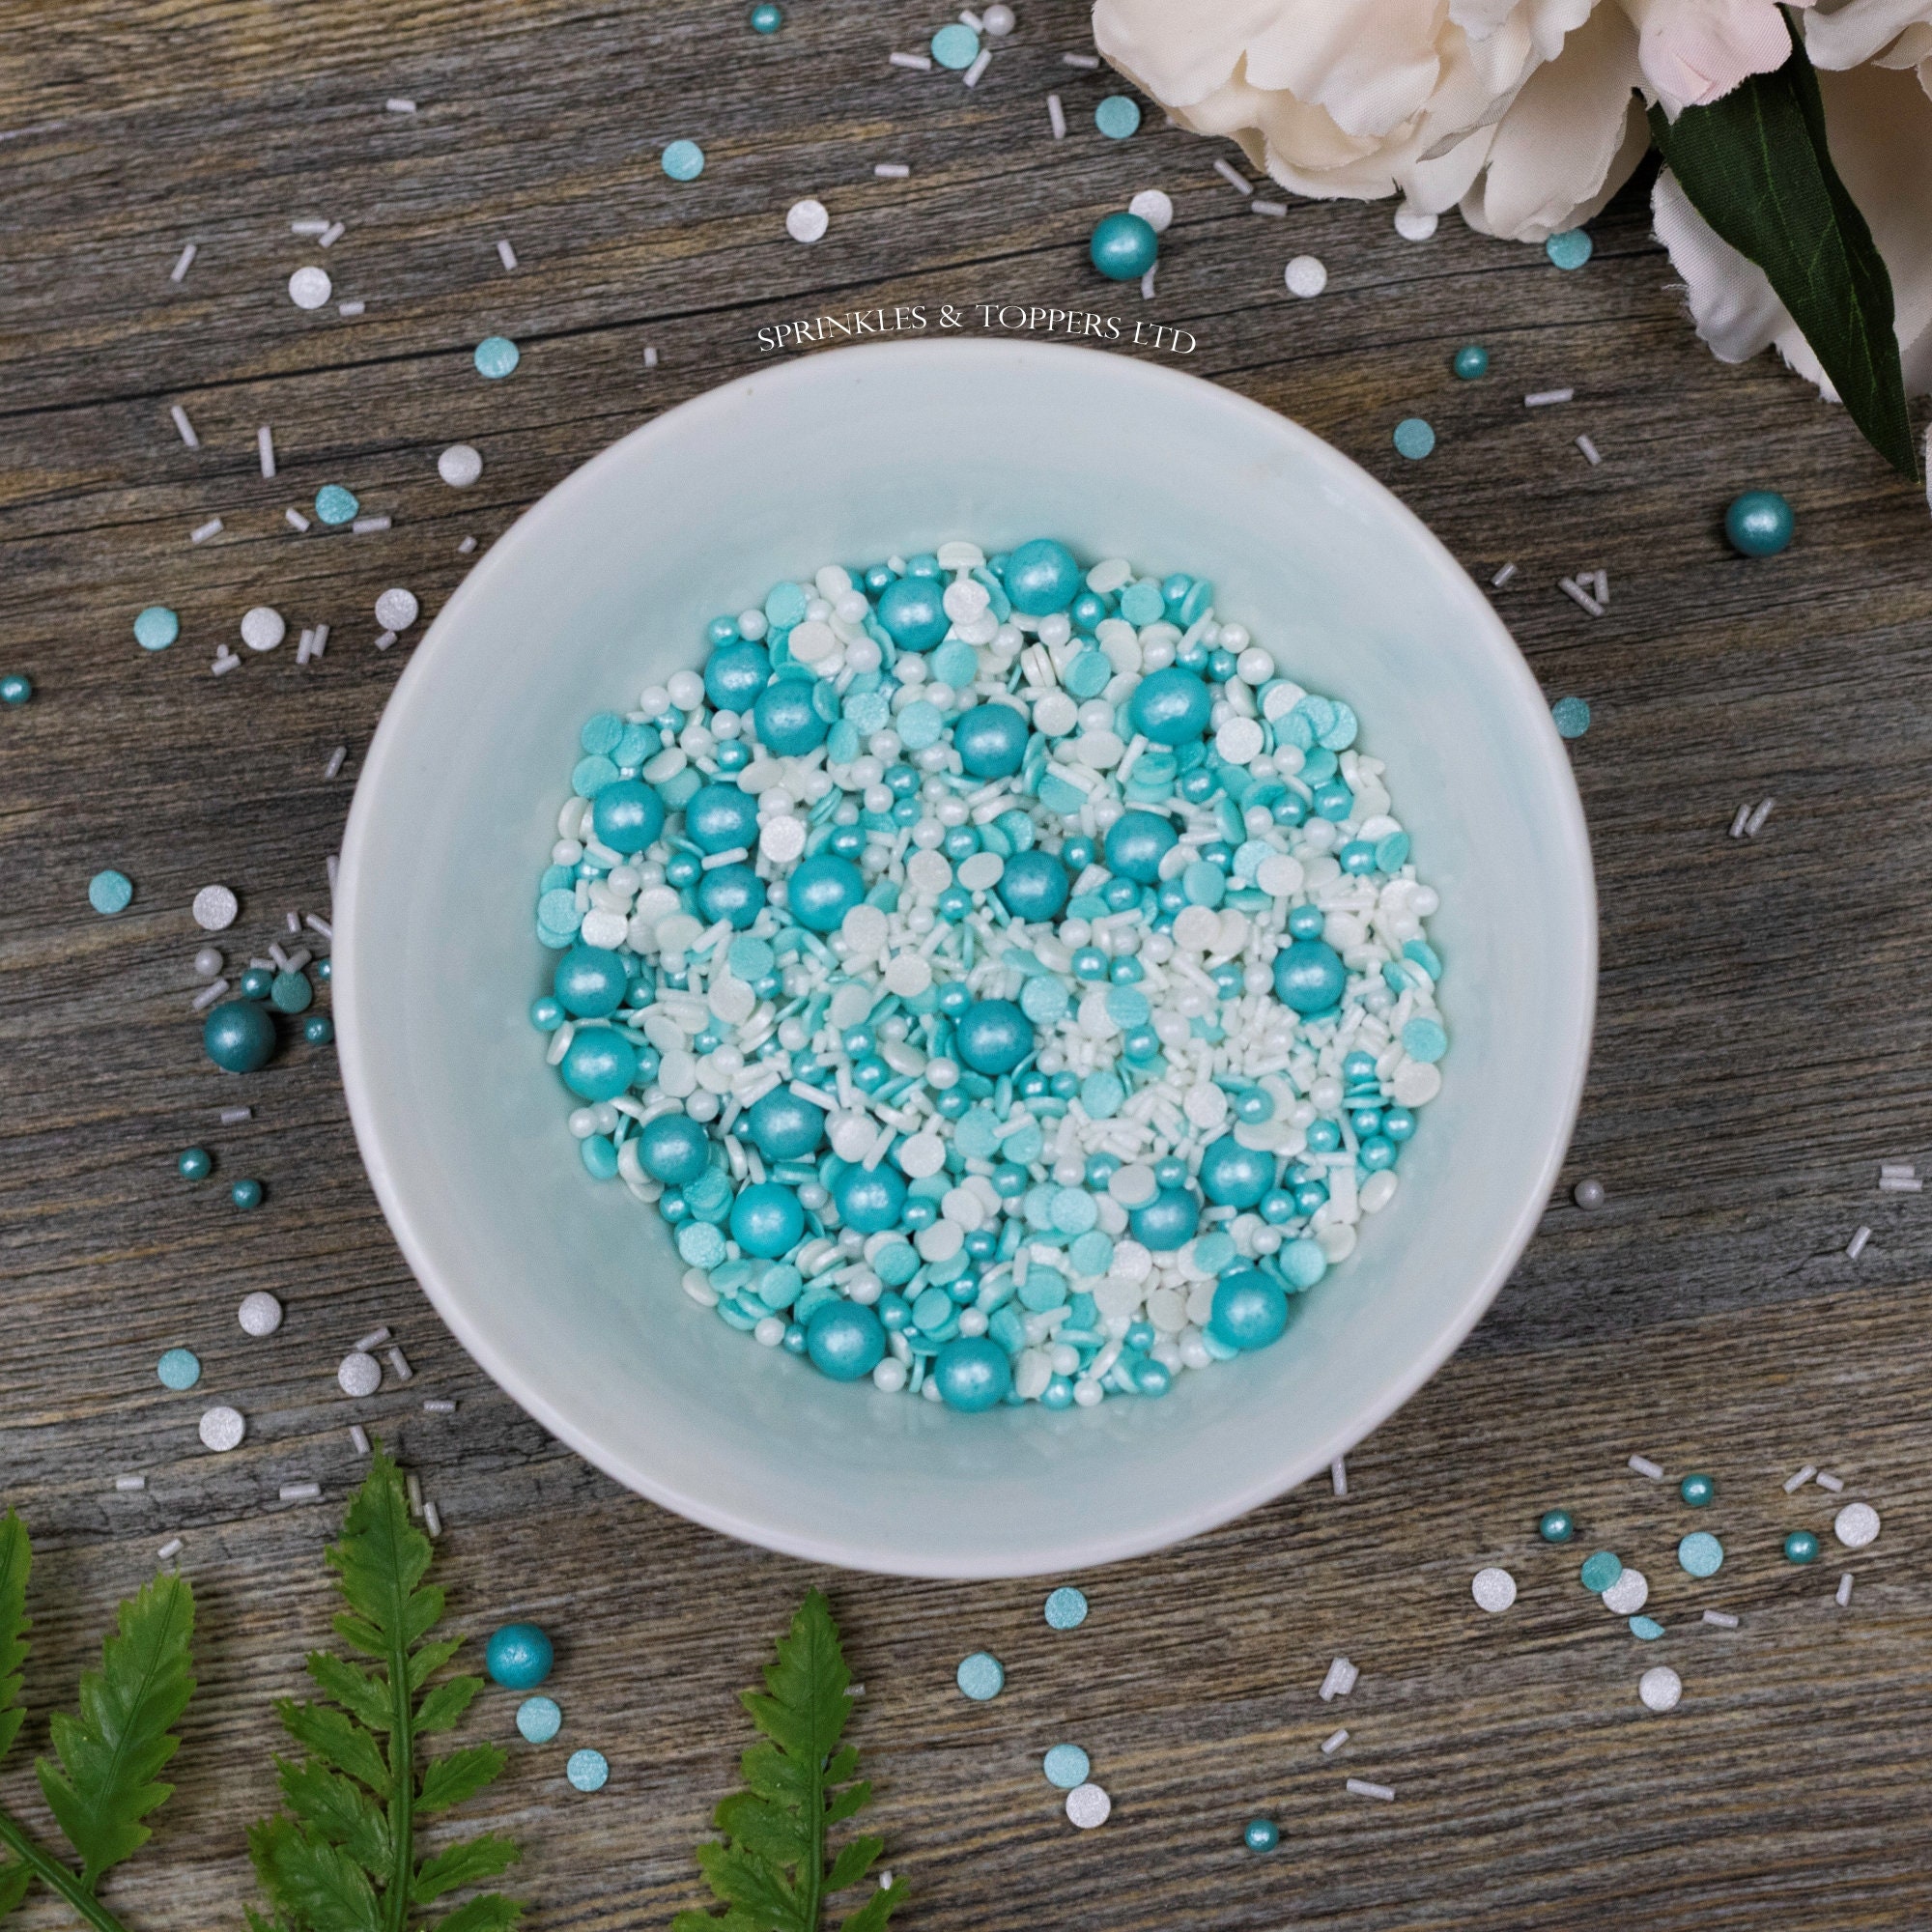 Turquoise Dreams Sprinkles Mix Cupcake / Cake Decorations - Etsy